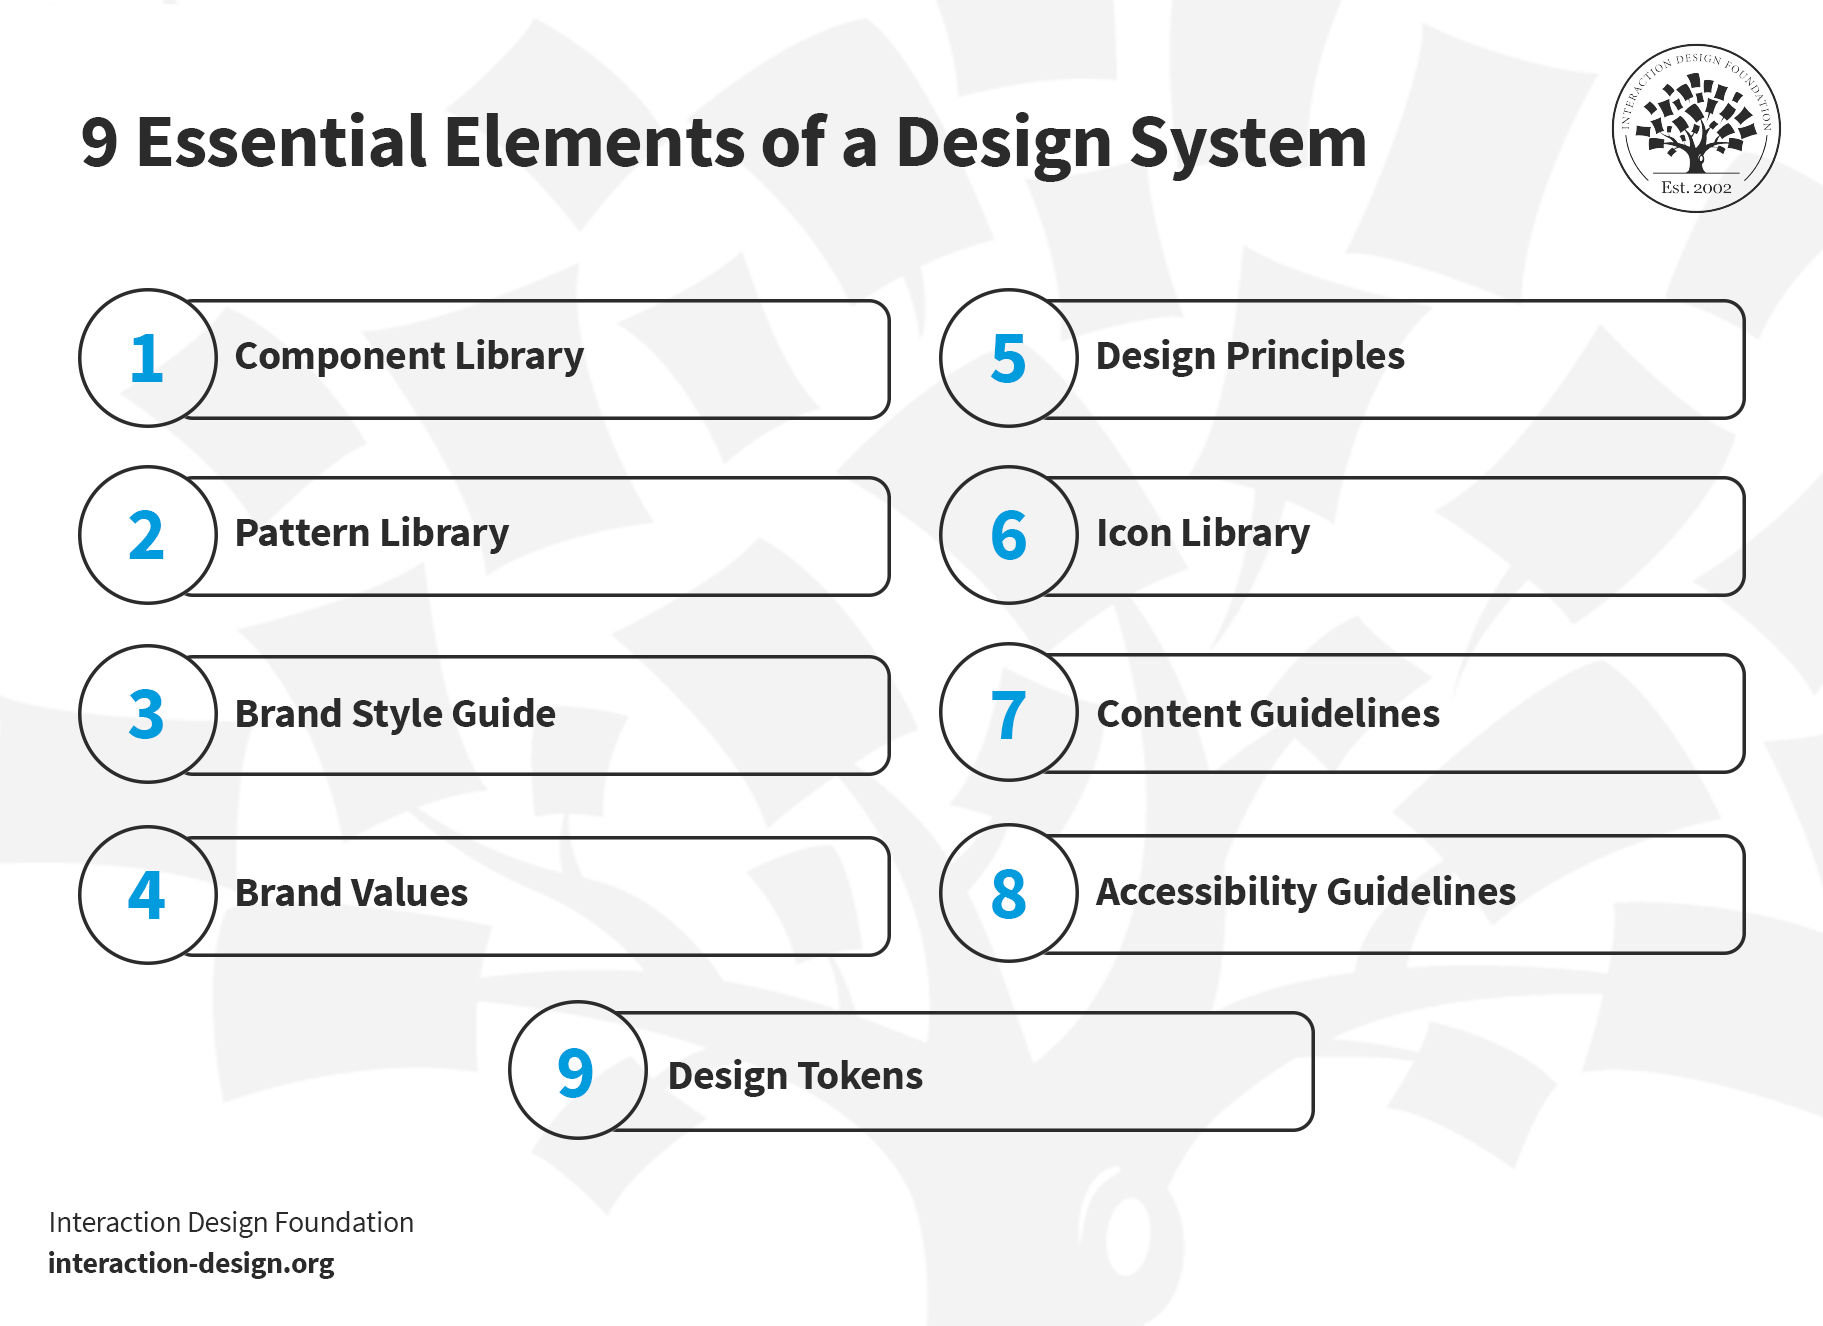 Design Systems: The Complete Guide